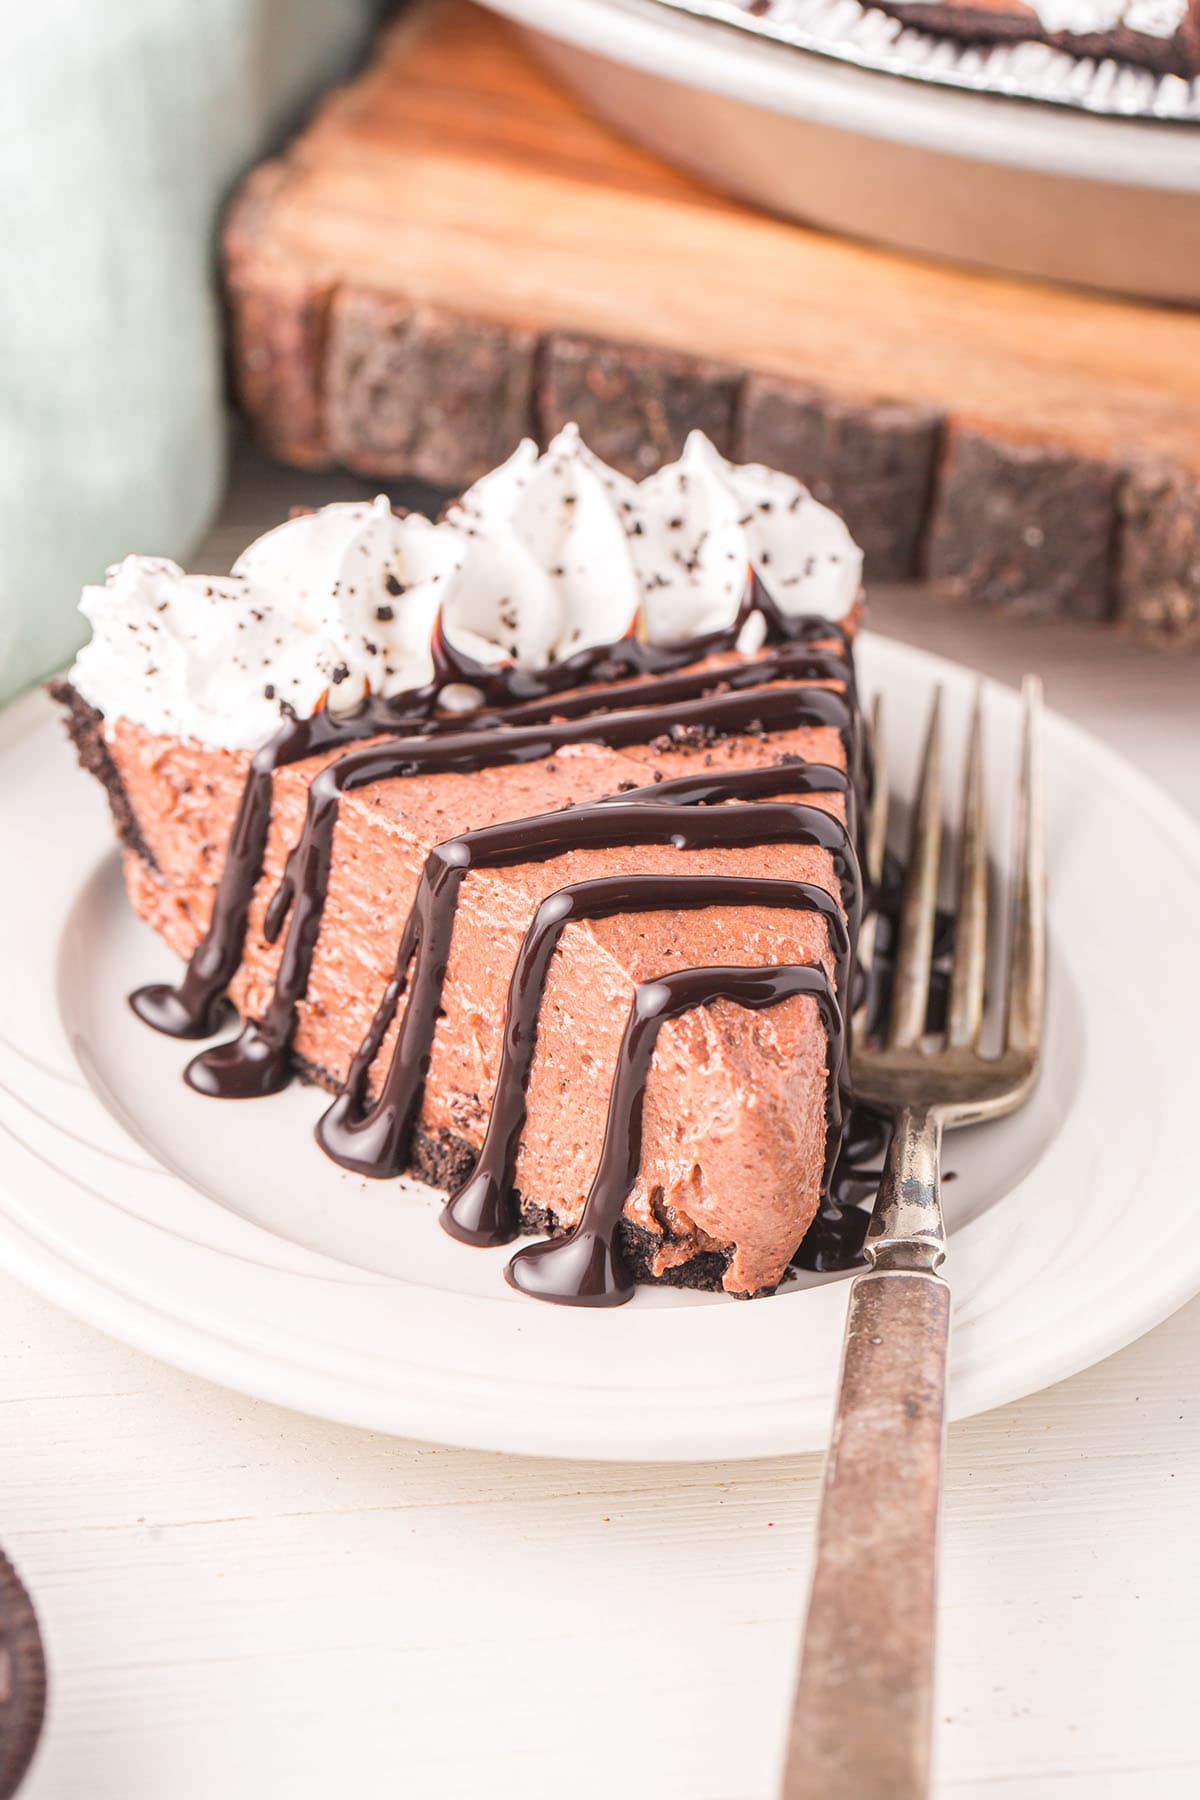 Nutella Pie on a plate with chocolate drizzle and whipped cream on top.